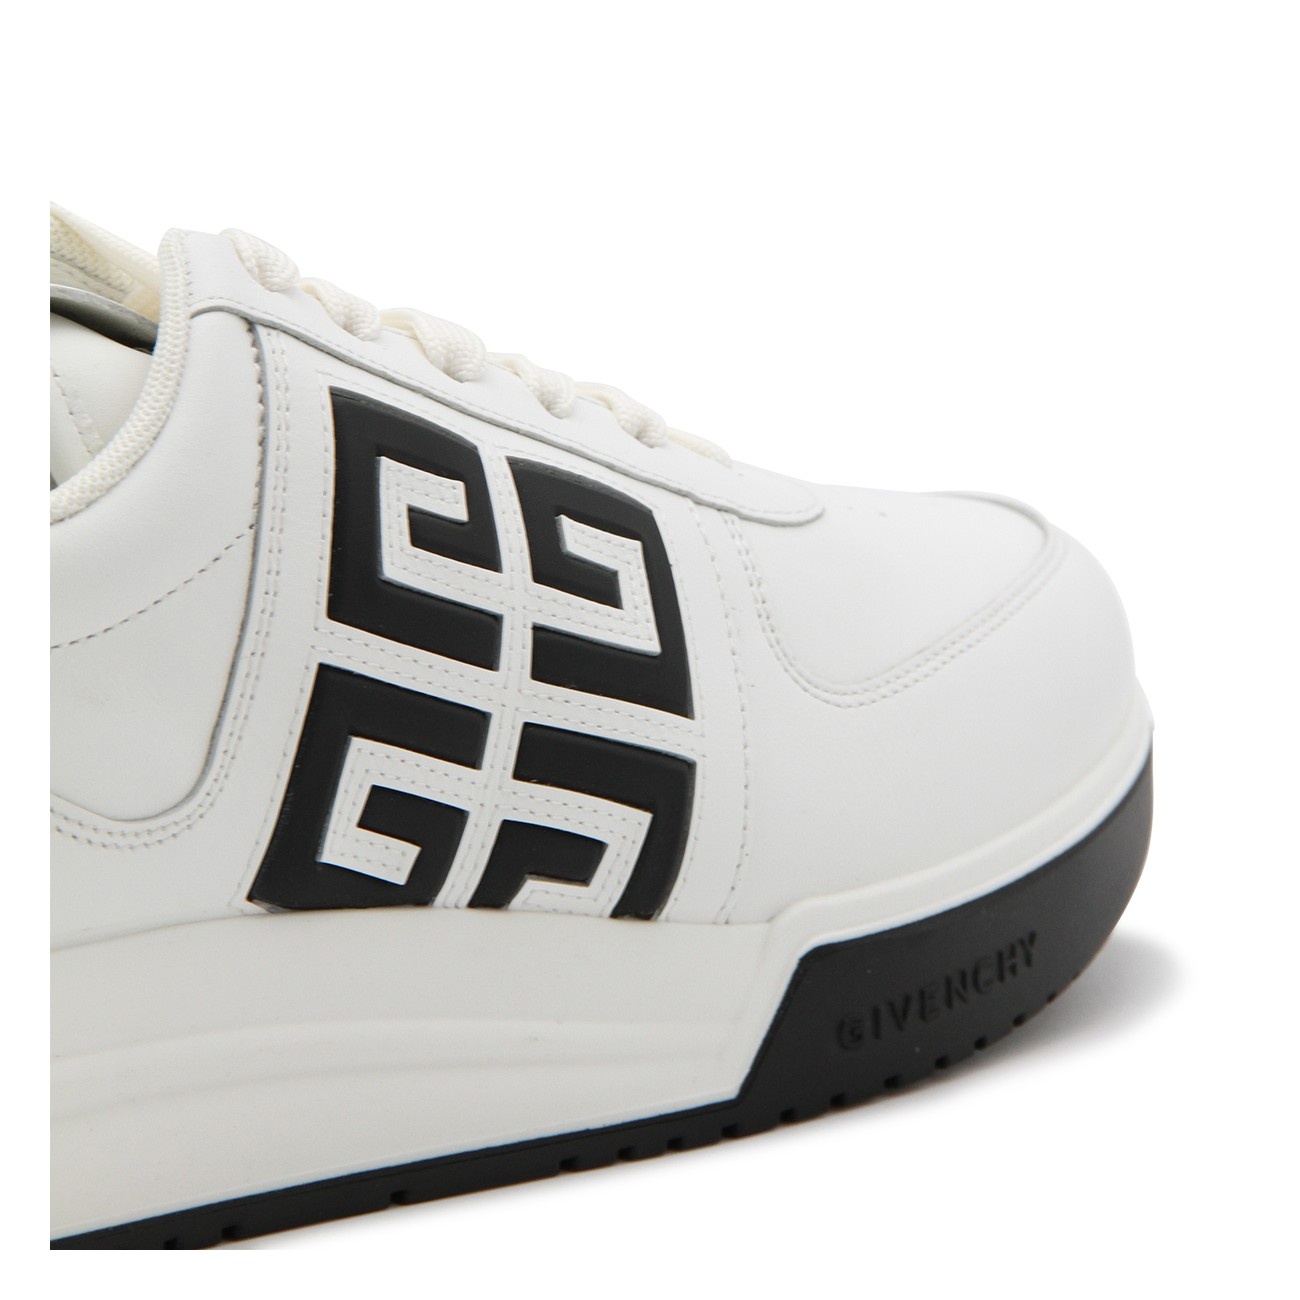 white and black leather sneakers - 4